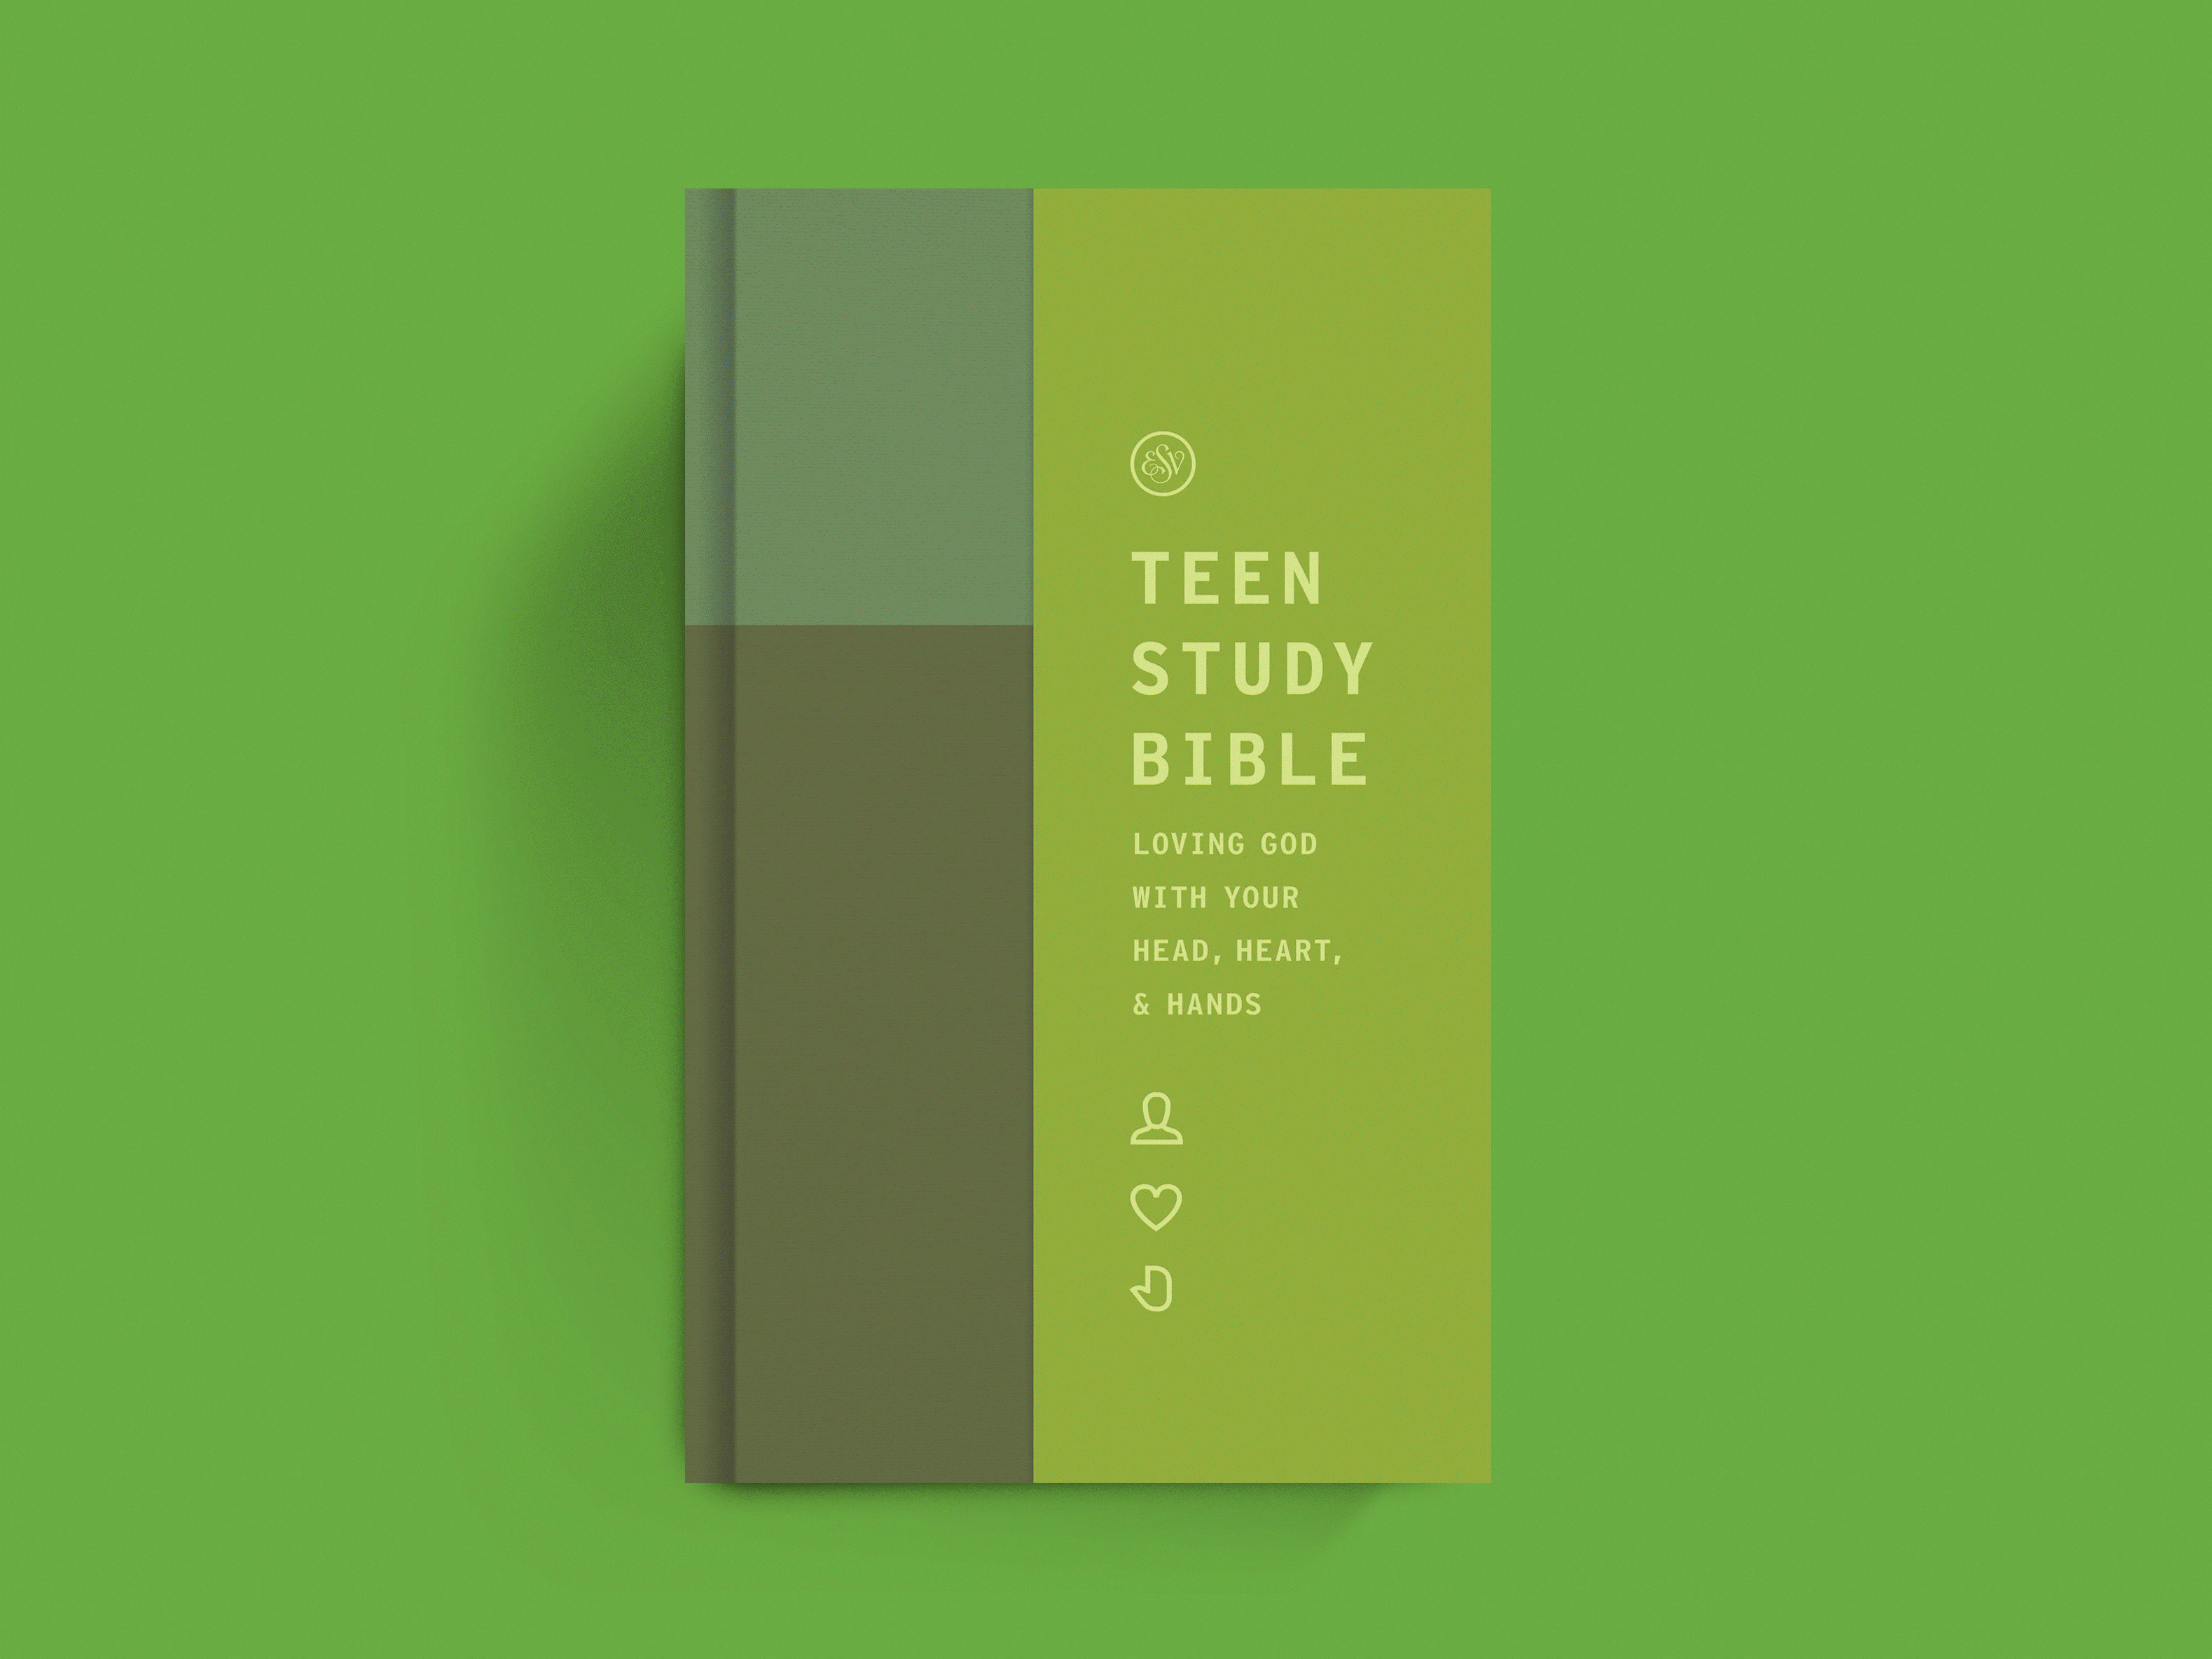 ESV Teen Study Bible Brand & Suite bible bold book branding bright christian church color design hand head heart icon illustration minimal simple teen texture youthful